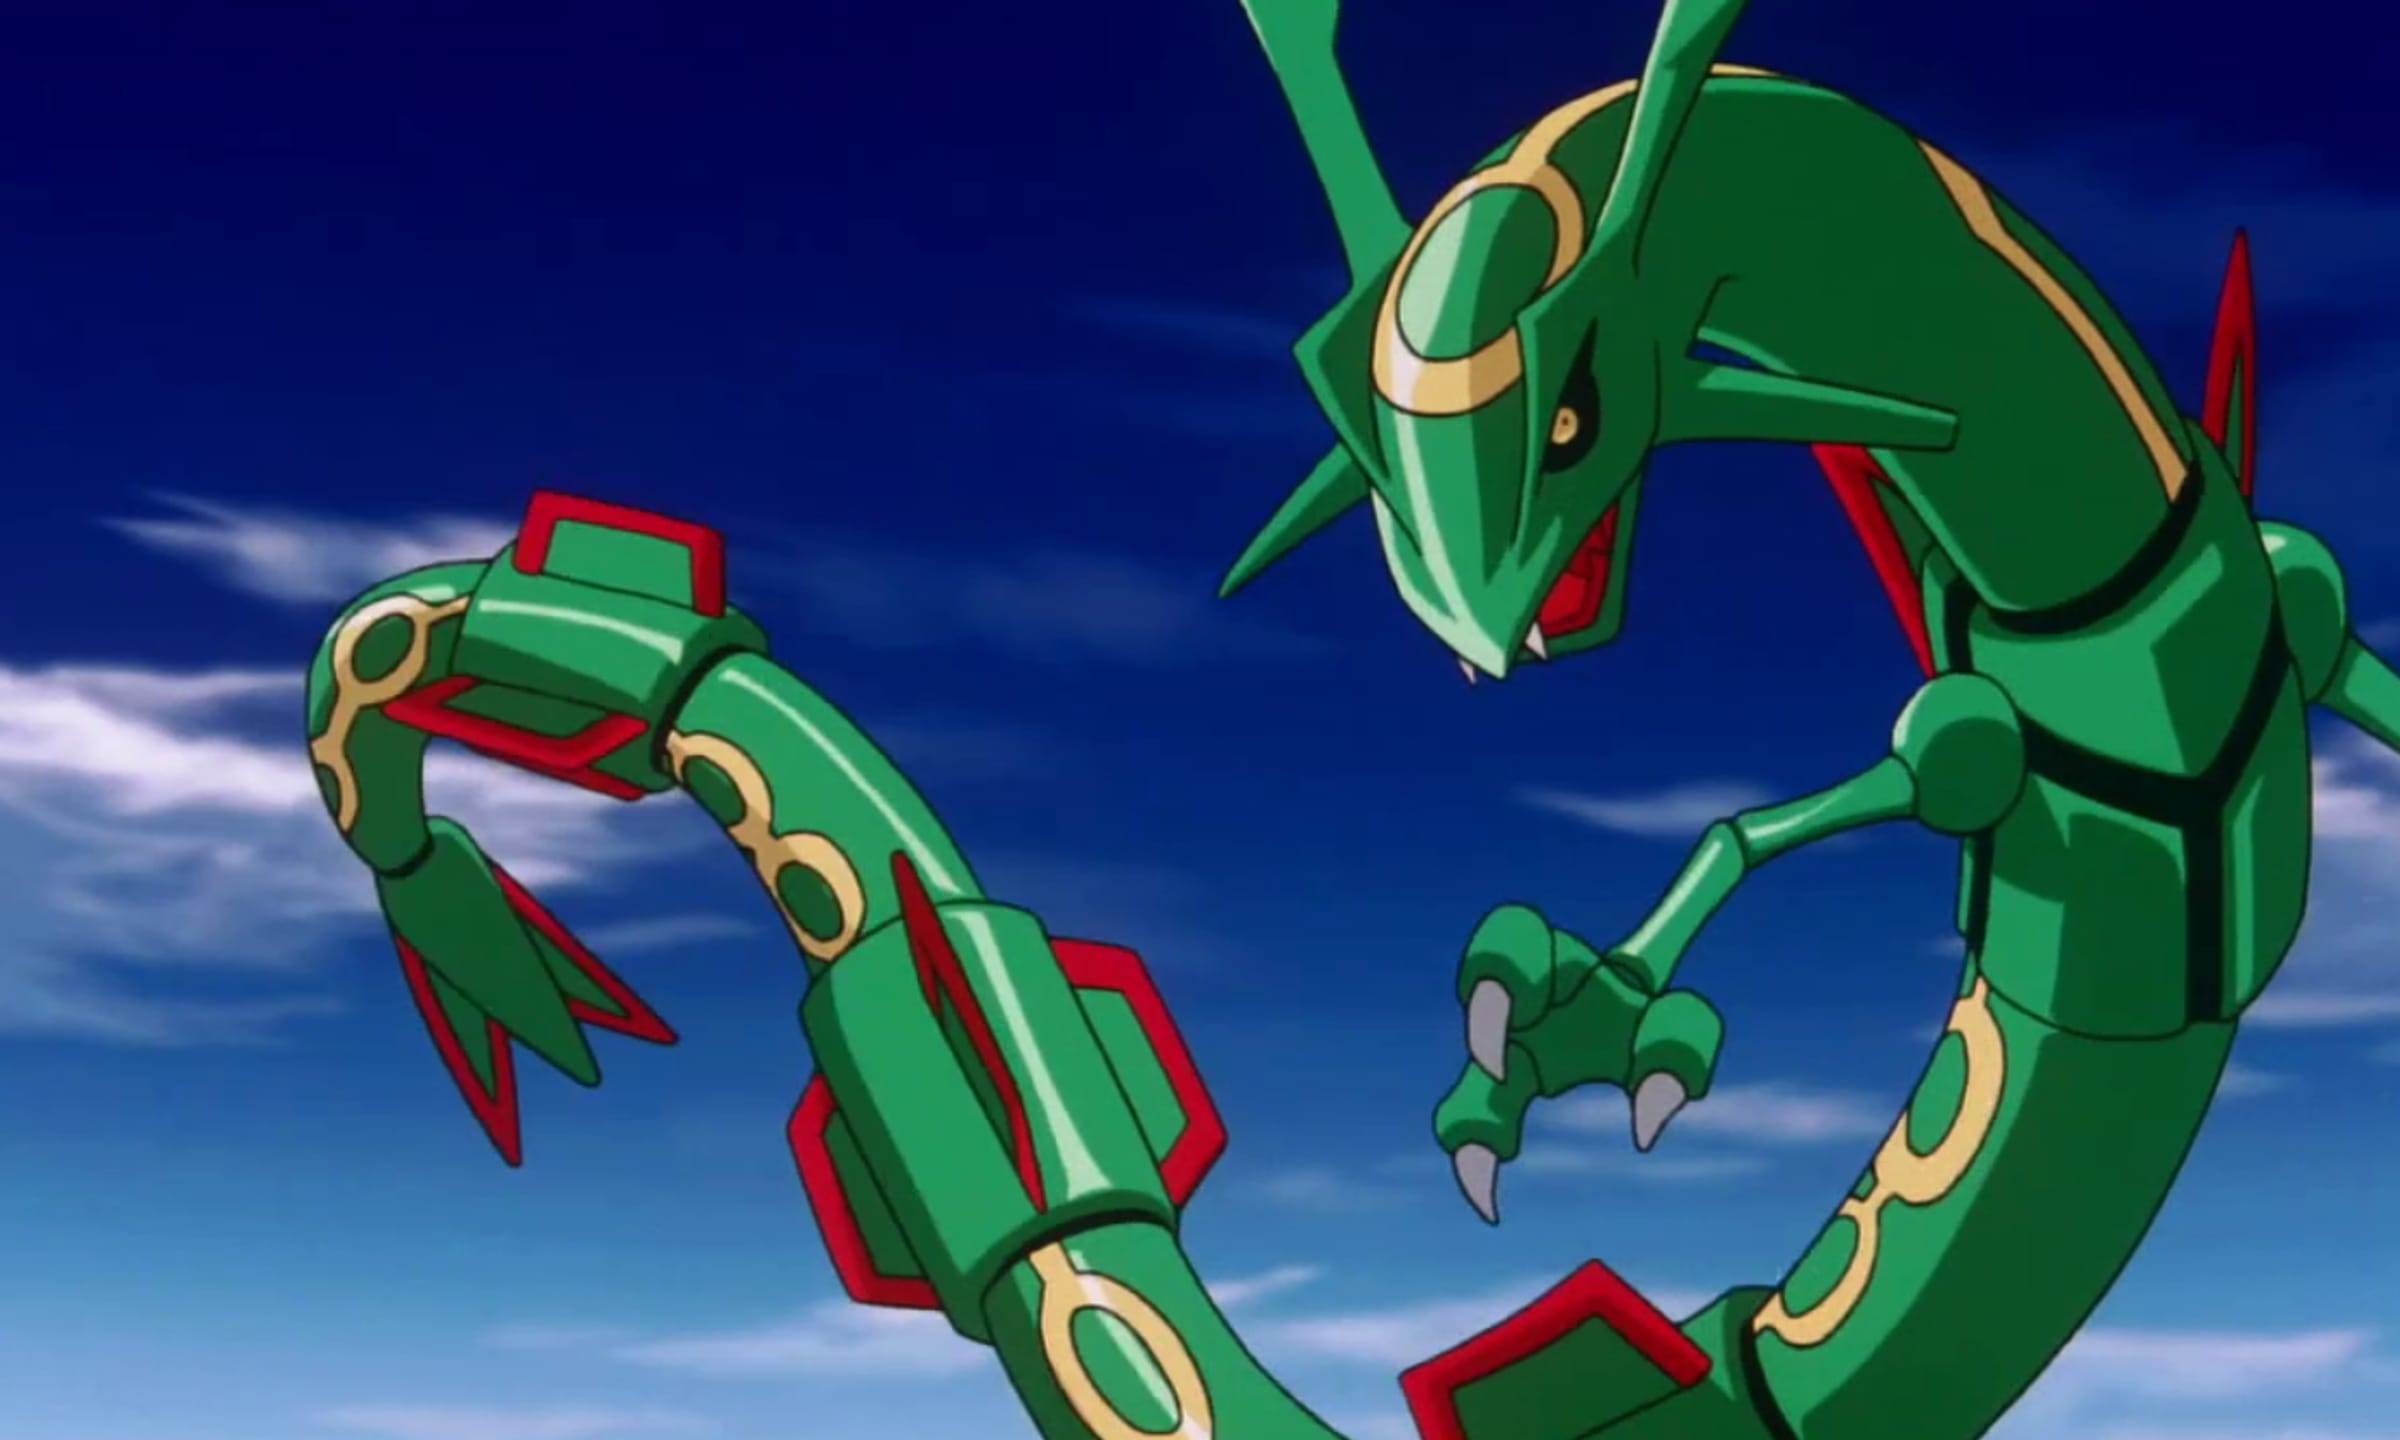 The 50+ Best Nicknames For Rayquaza, Ranked